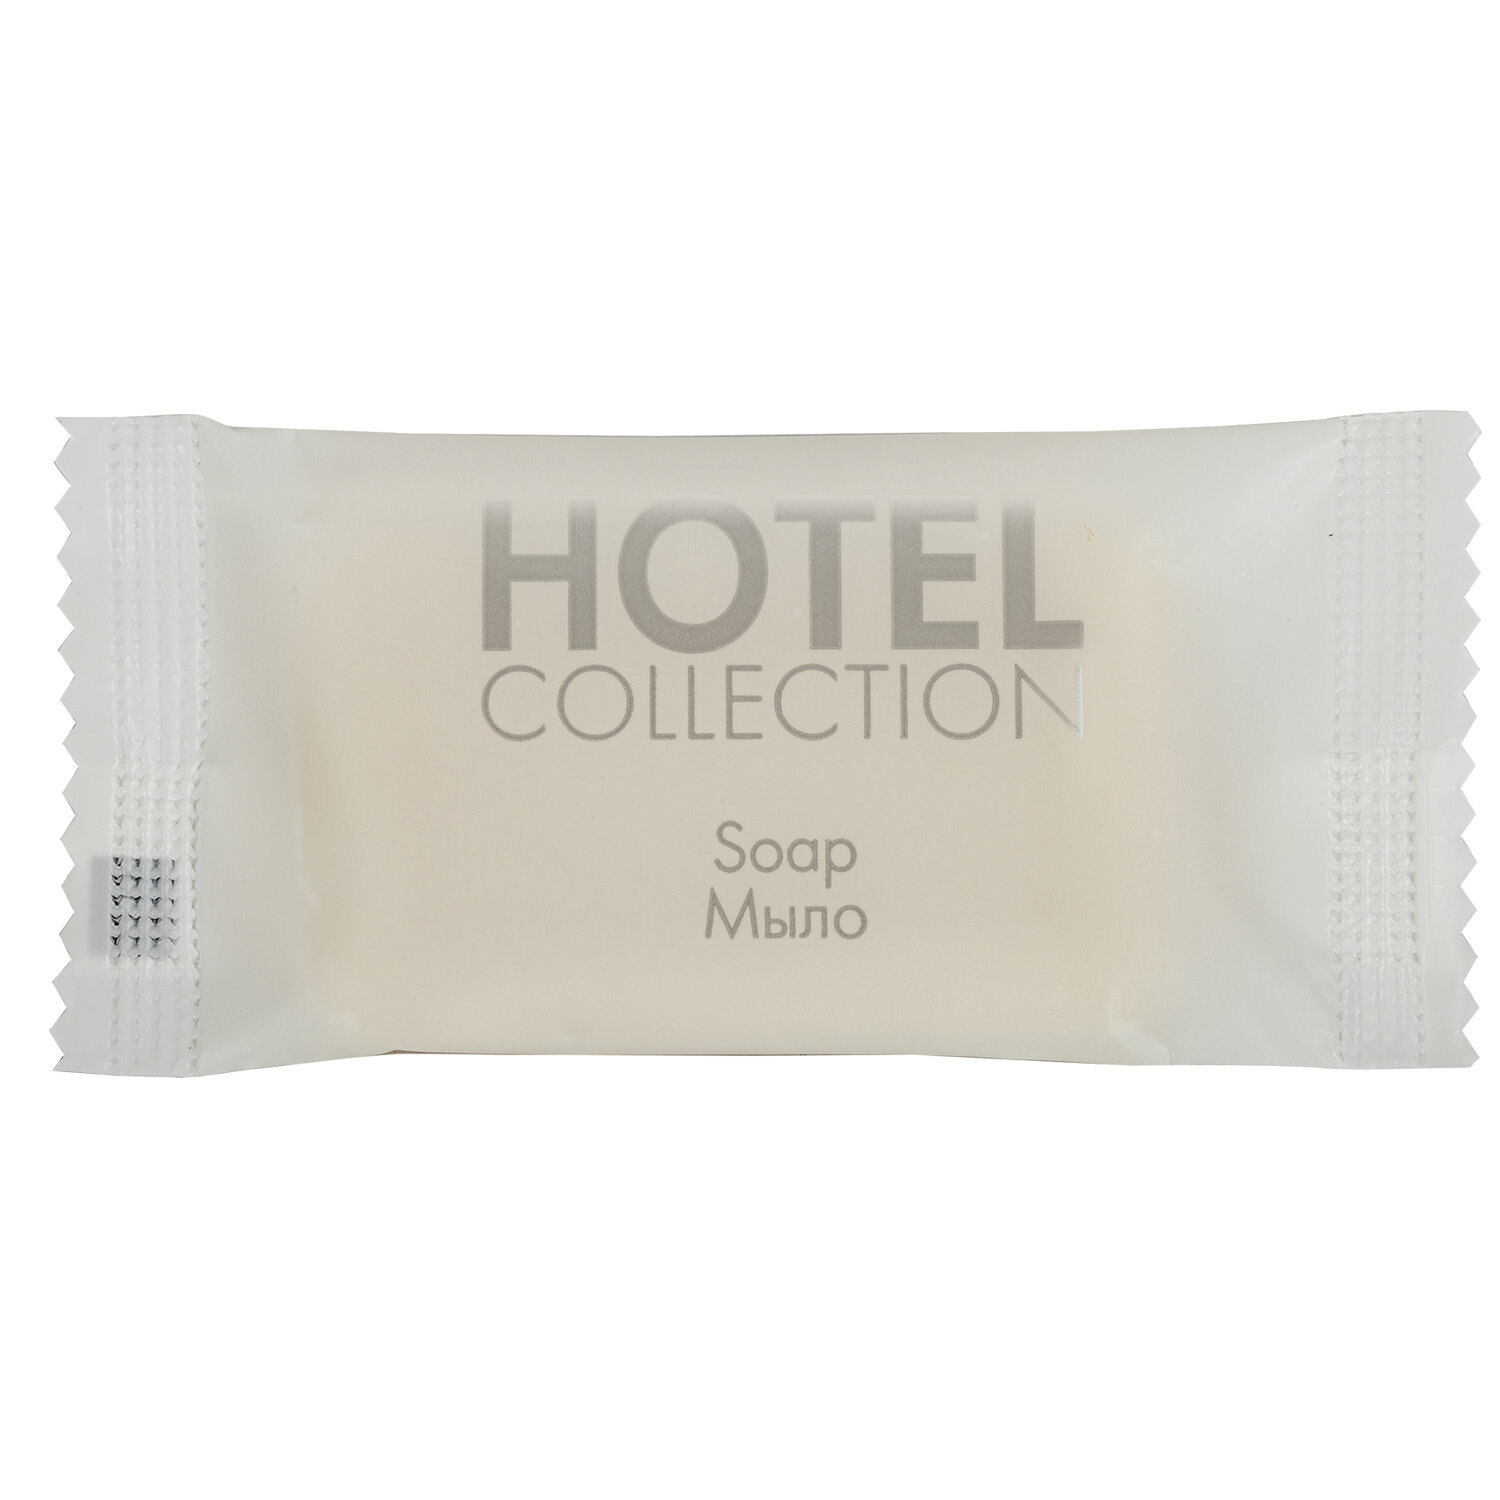 HOTEL COLLECTION  HOTEL COLLECTION 608844